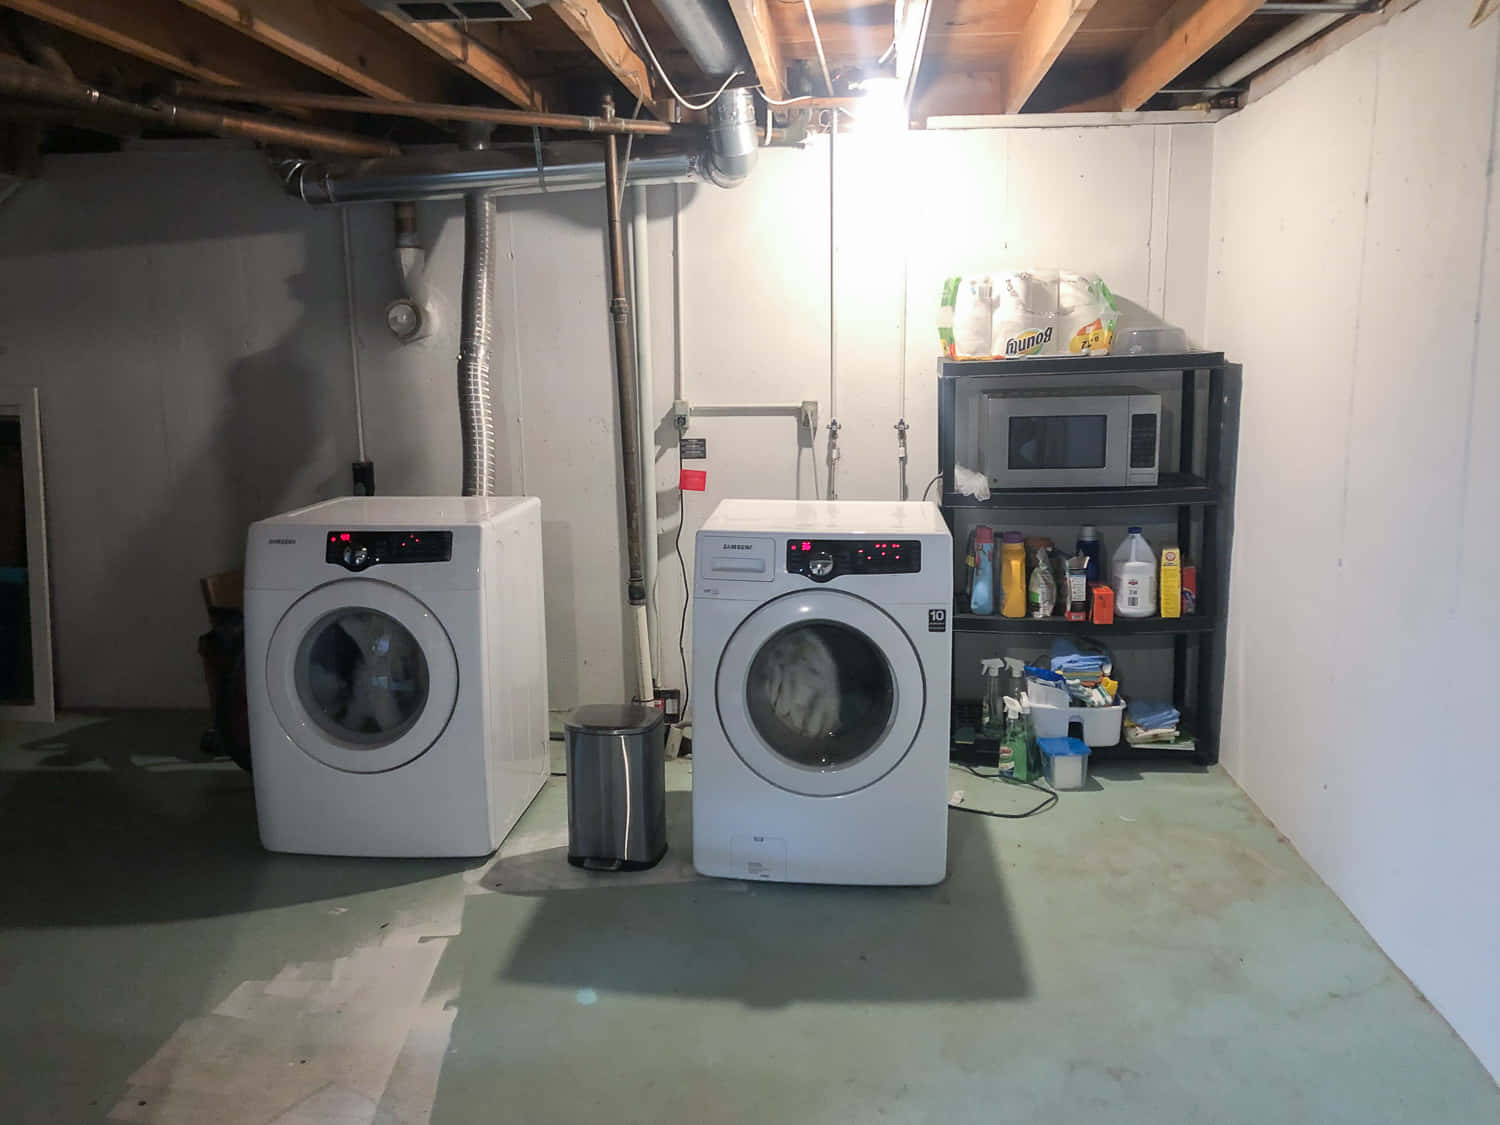 Two Washers And Dryers In A Basement